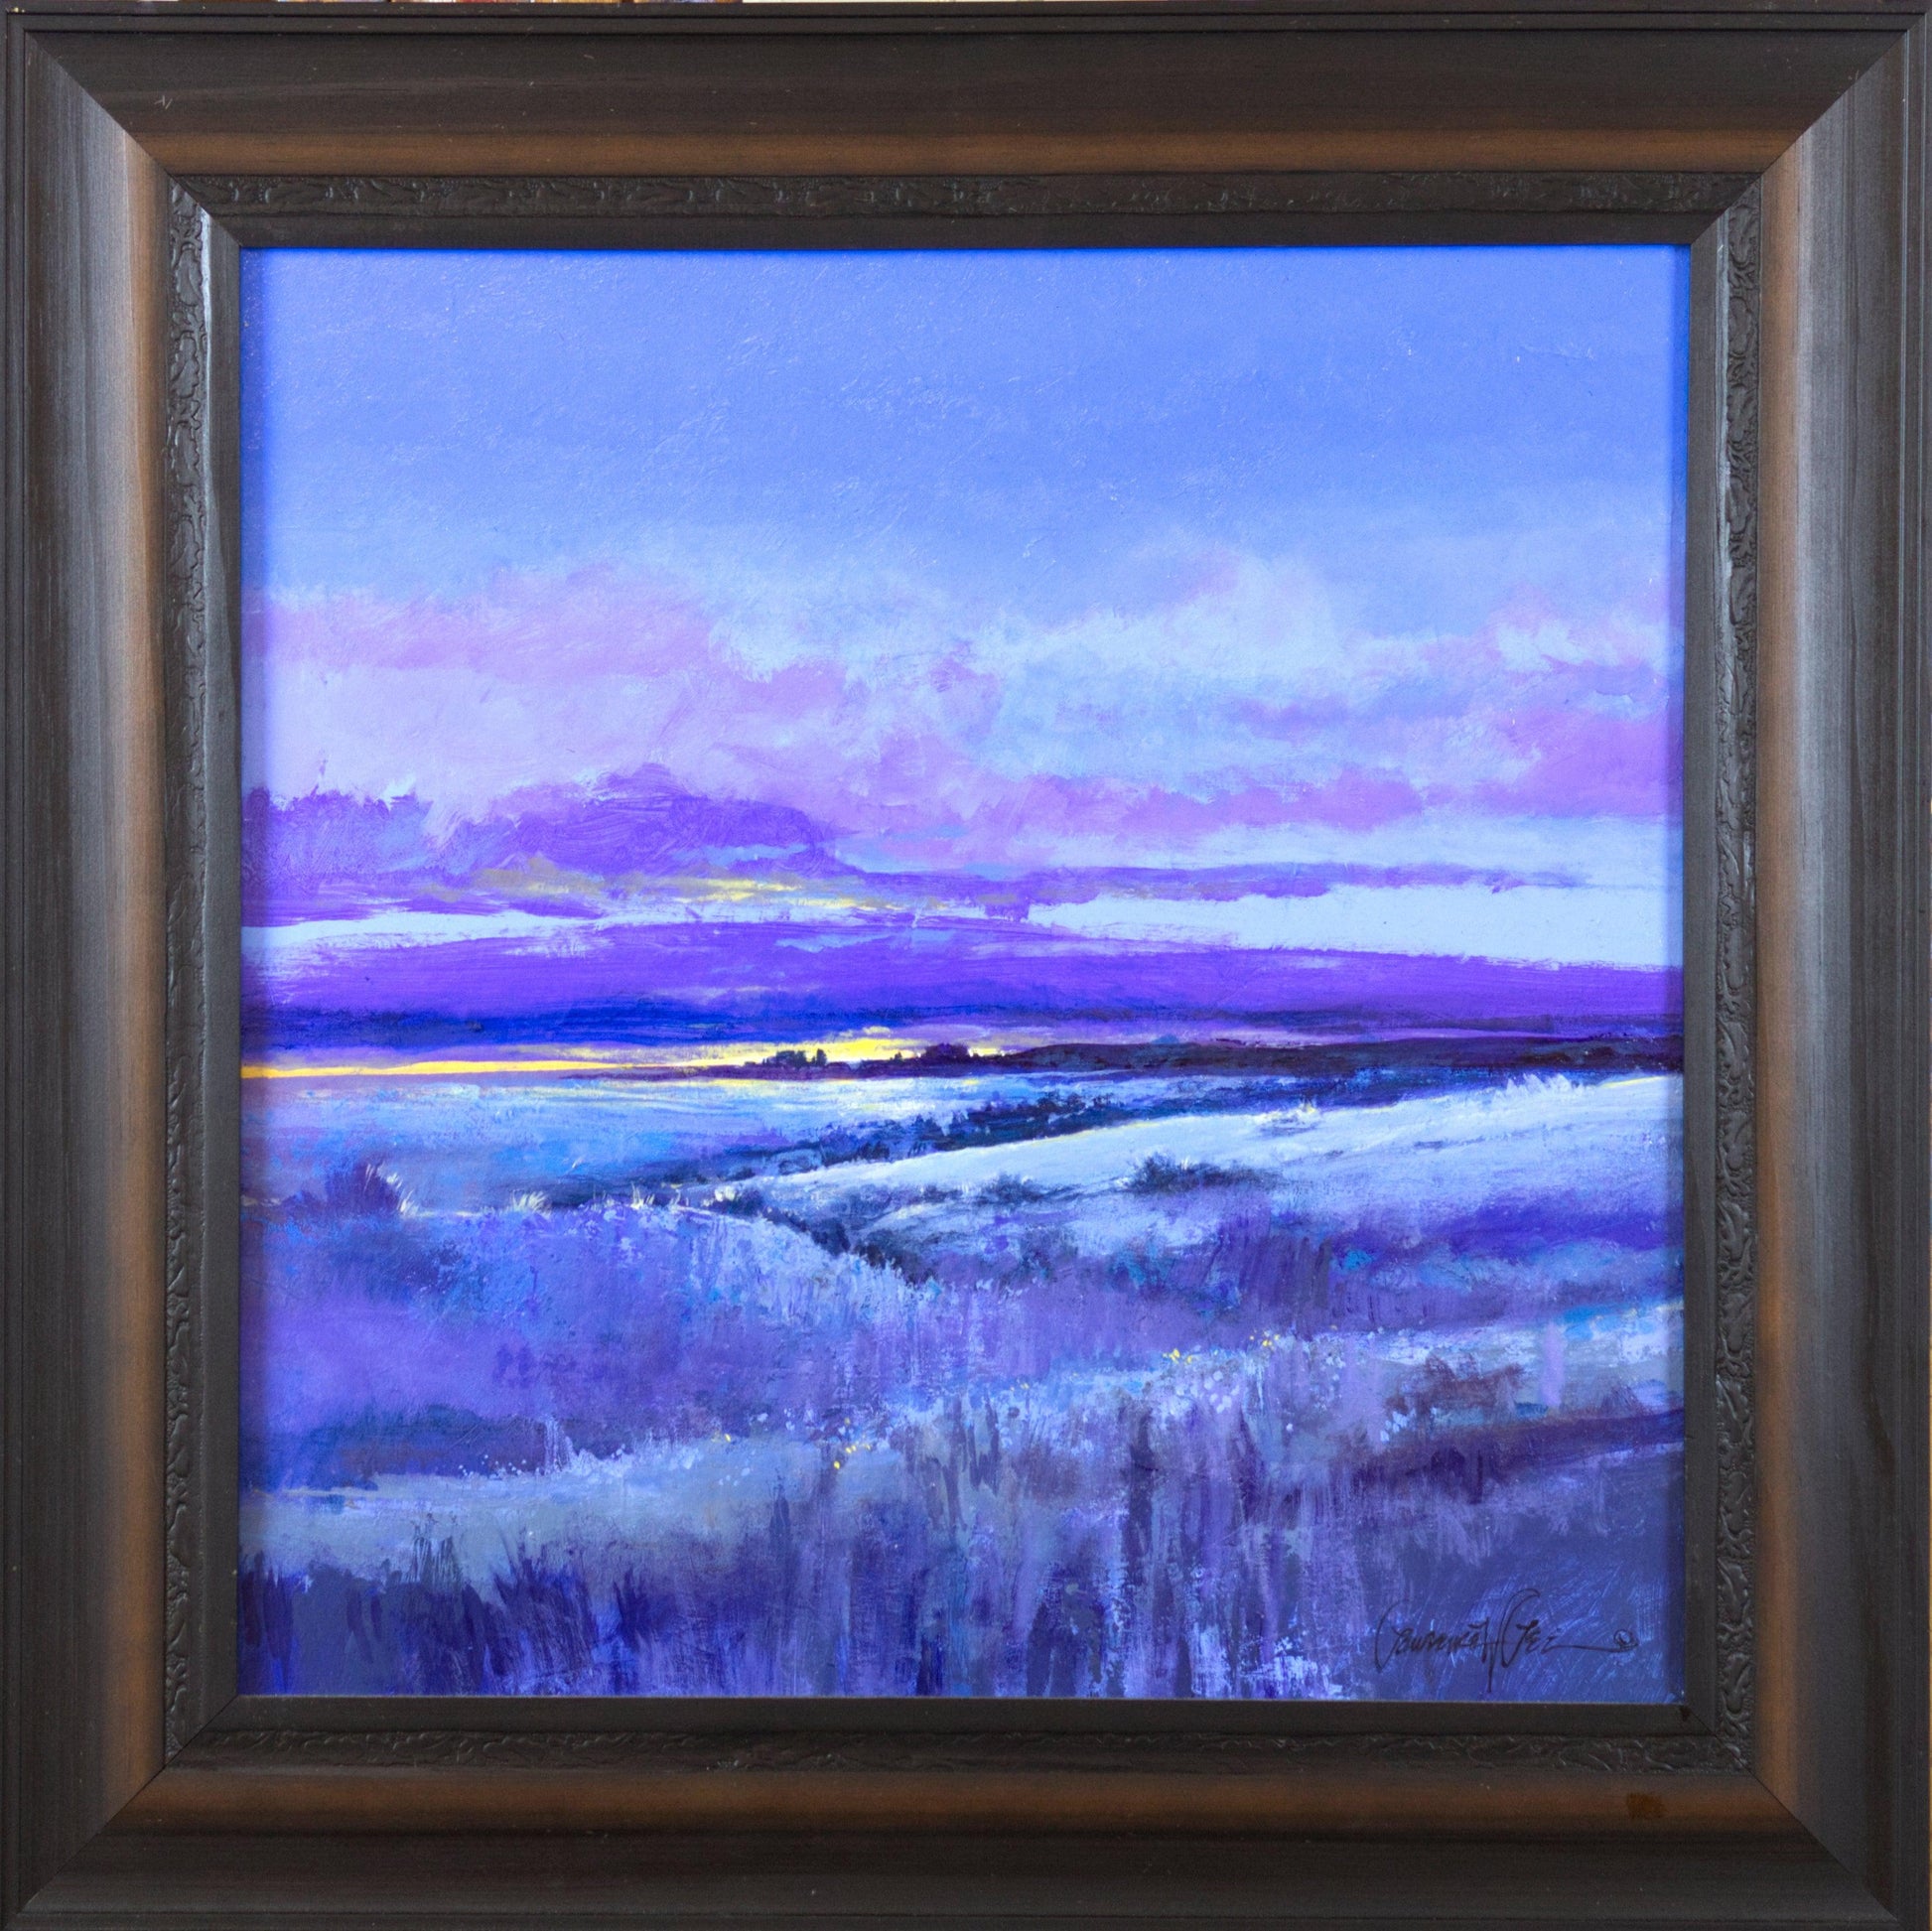 Northcountry Quiet-Painting-Lawrence Lee-Sorrel Sky Gallery